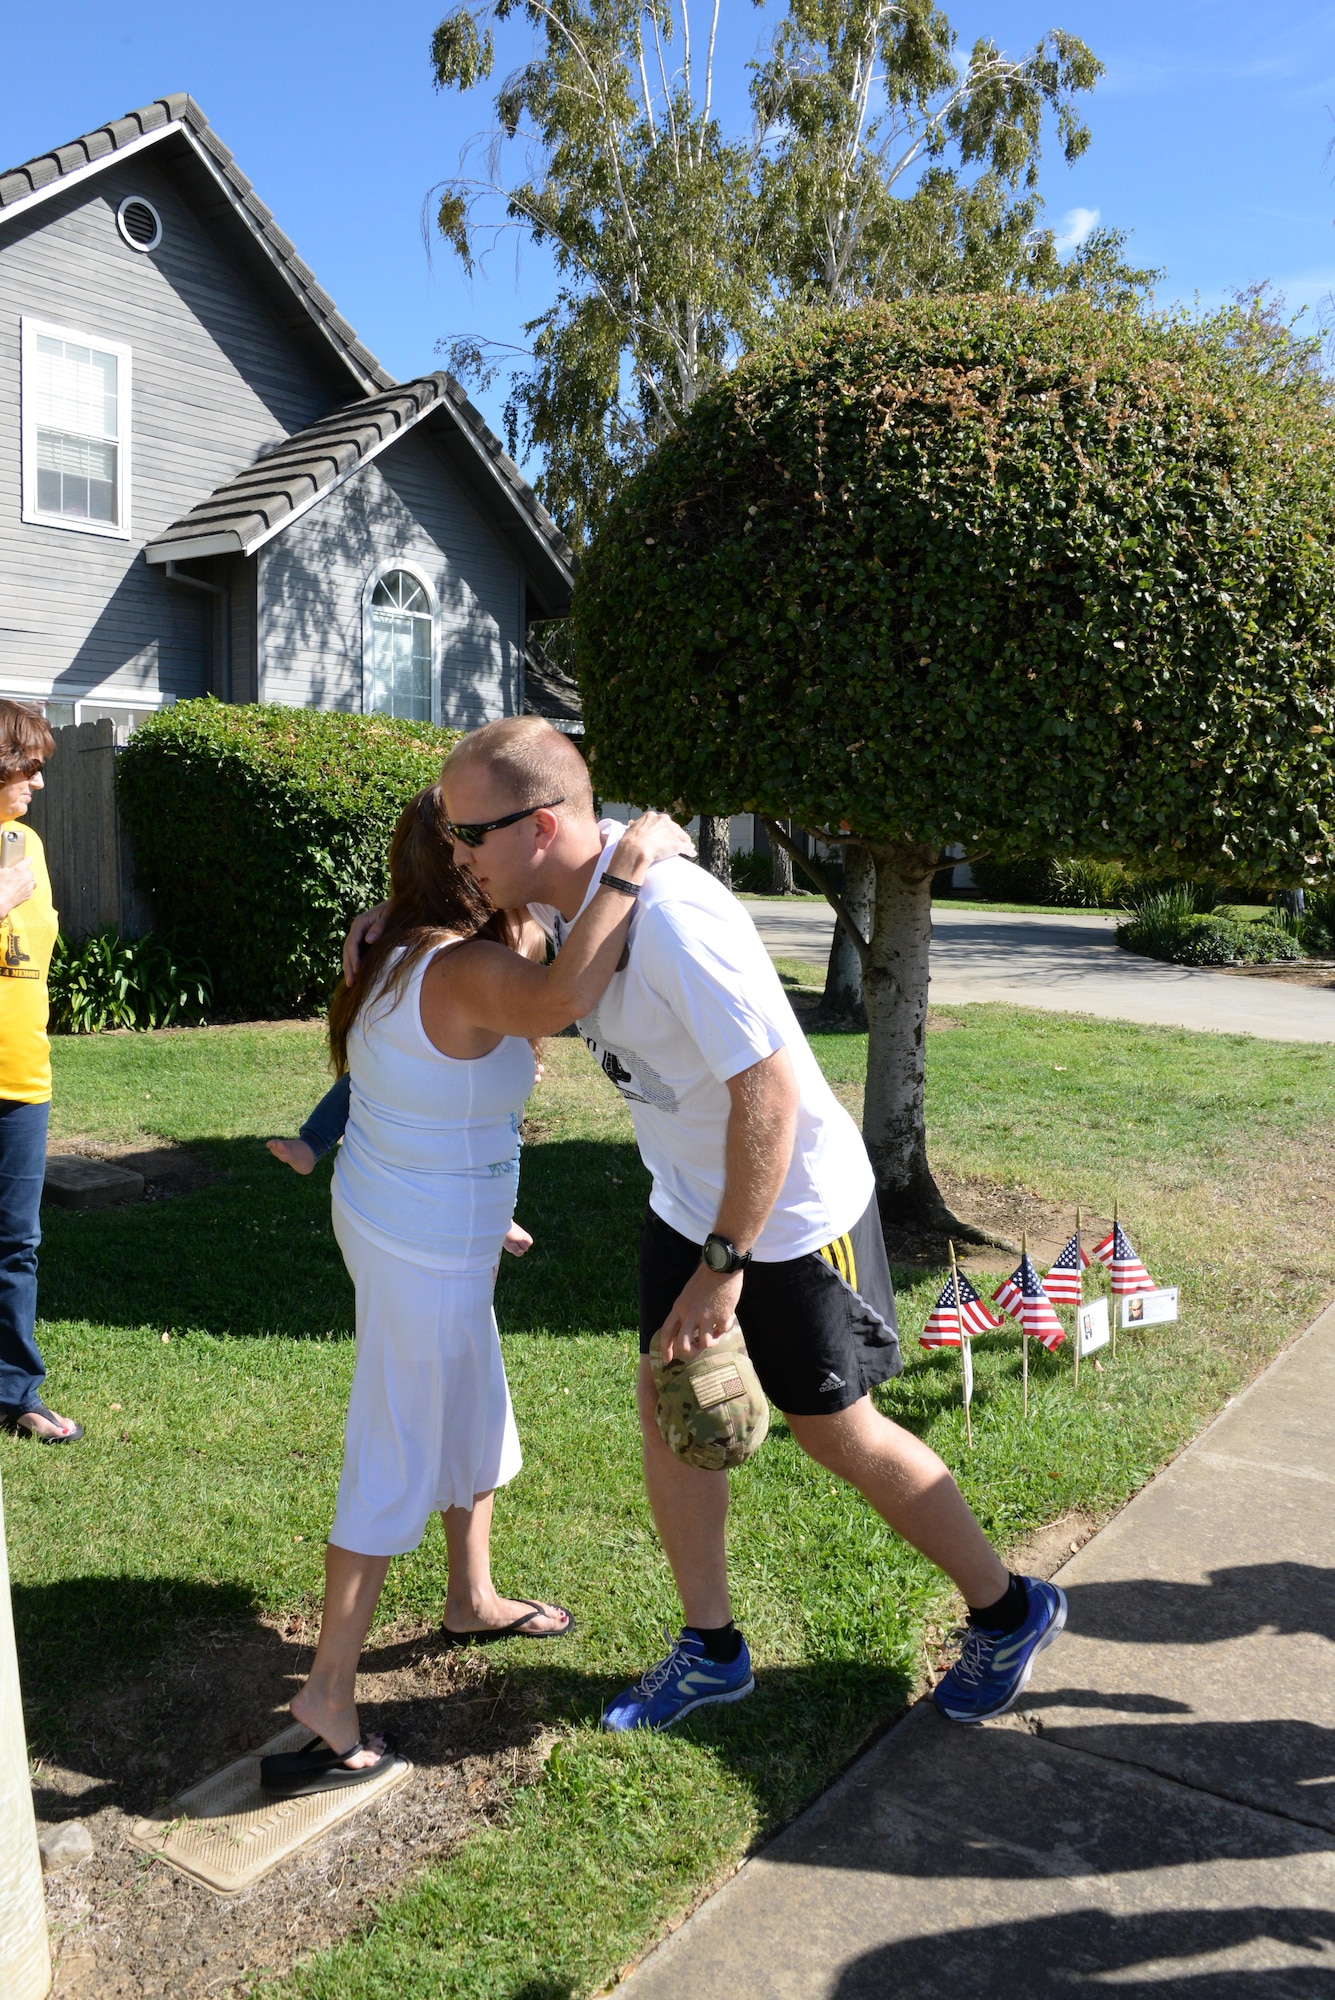 1st Lt Austin McCall, 60th Civil Engineering Squadron, hugs Donna Casillas, mother of Private 1st Class Justin Casillas, who was killed in action on July 4, 2009 in Afghanistan, during the California Run for the Fallen on Sept. 23, 2016. The run raises awareness for California service members who were killed in action after Sept. 11, 2001, rejuvenating their memories and keeping their spirits alive.  (U.S. Air Force photo by 2nd Lt Geneva Croxton